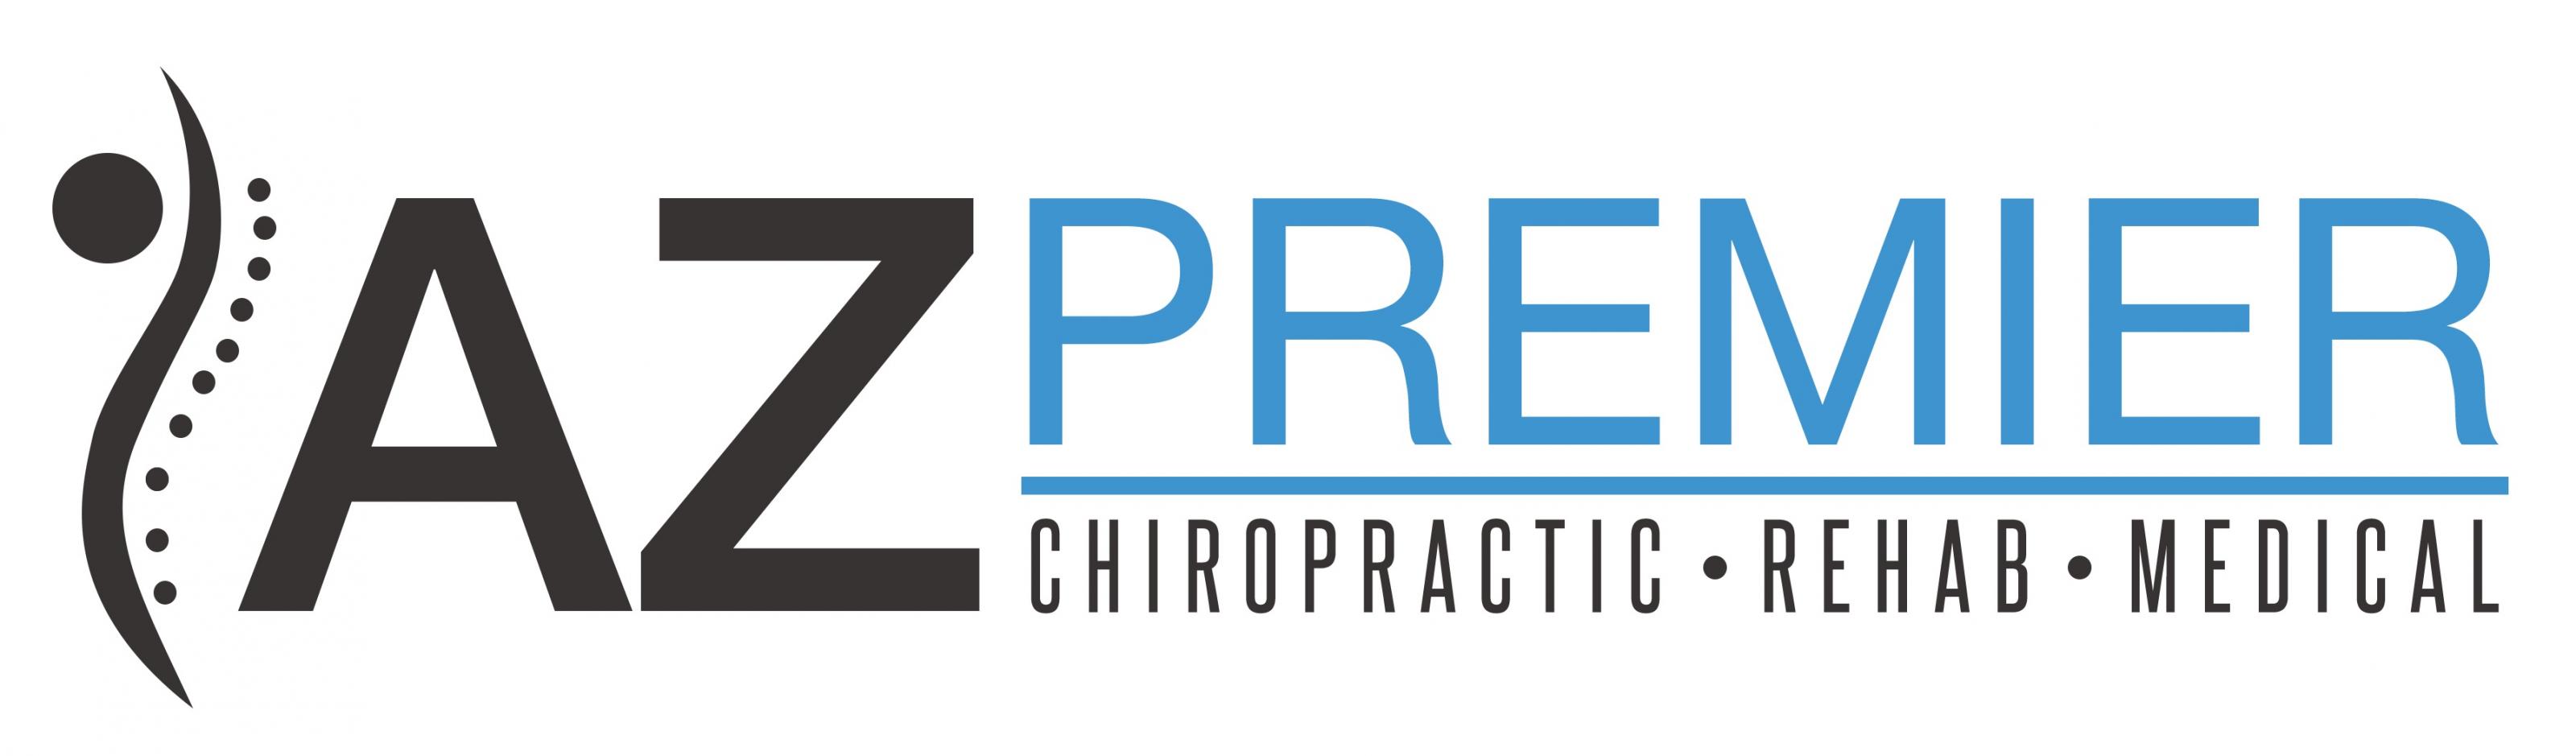 Schedule an Appointment with AZ Premier Chiropractic and Rehab for Expert Injury Treatment